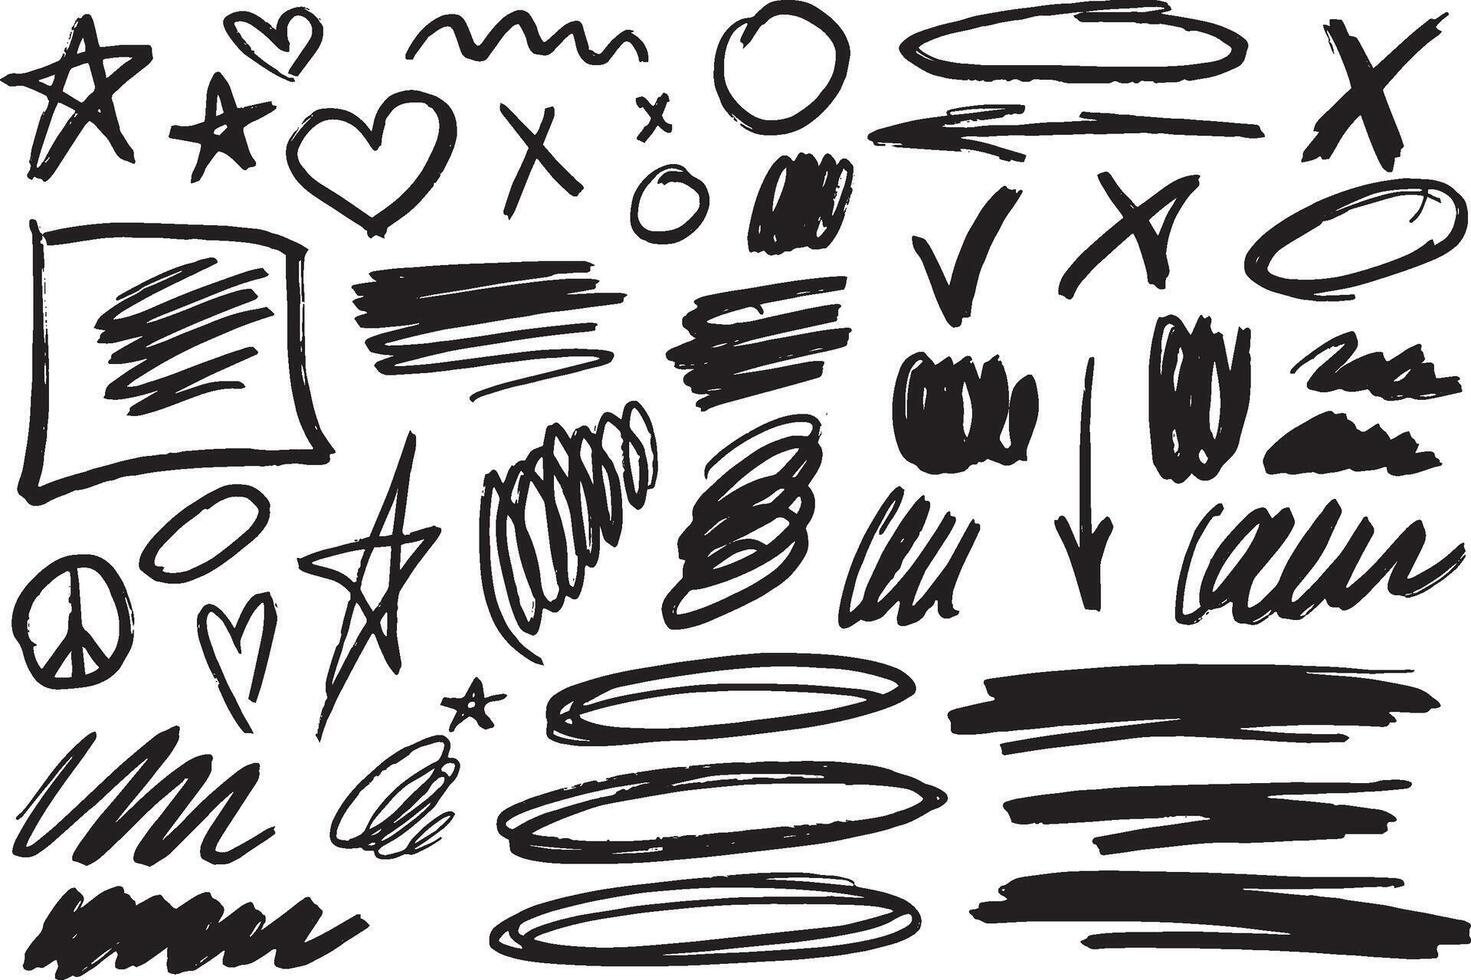 Black and white marker abstract with black lines and shapes on a white background vector